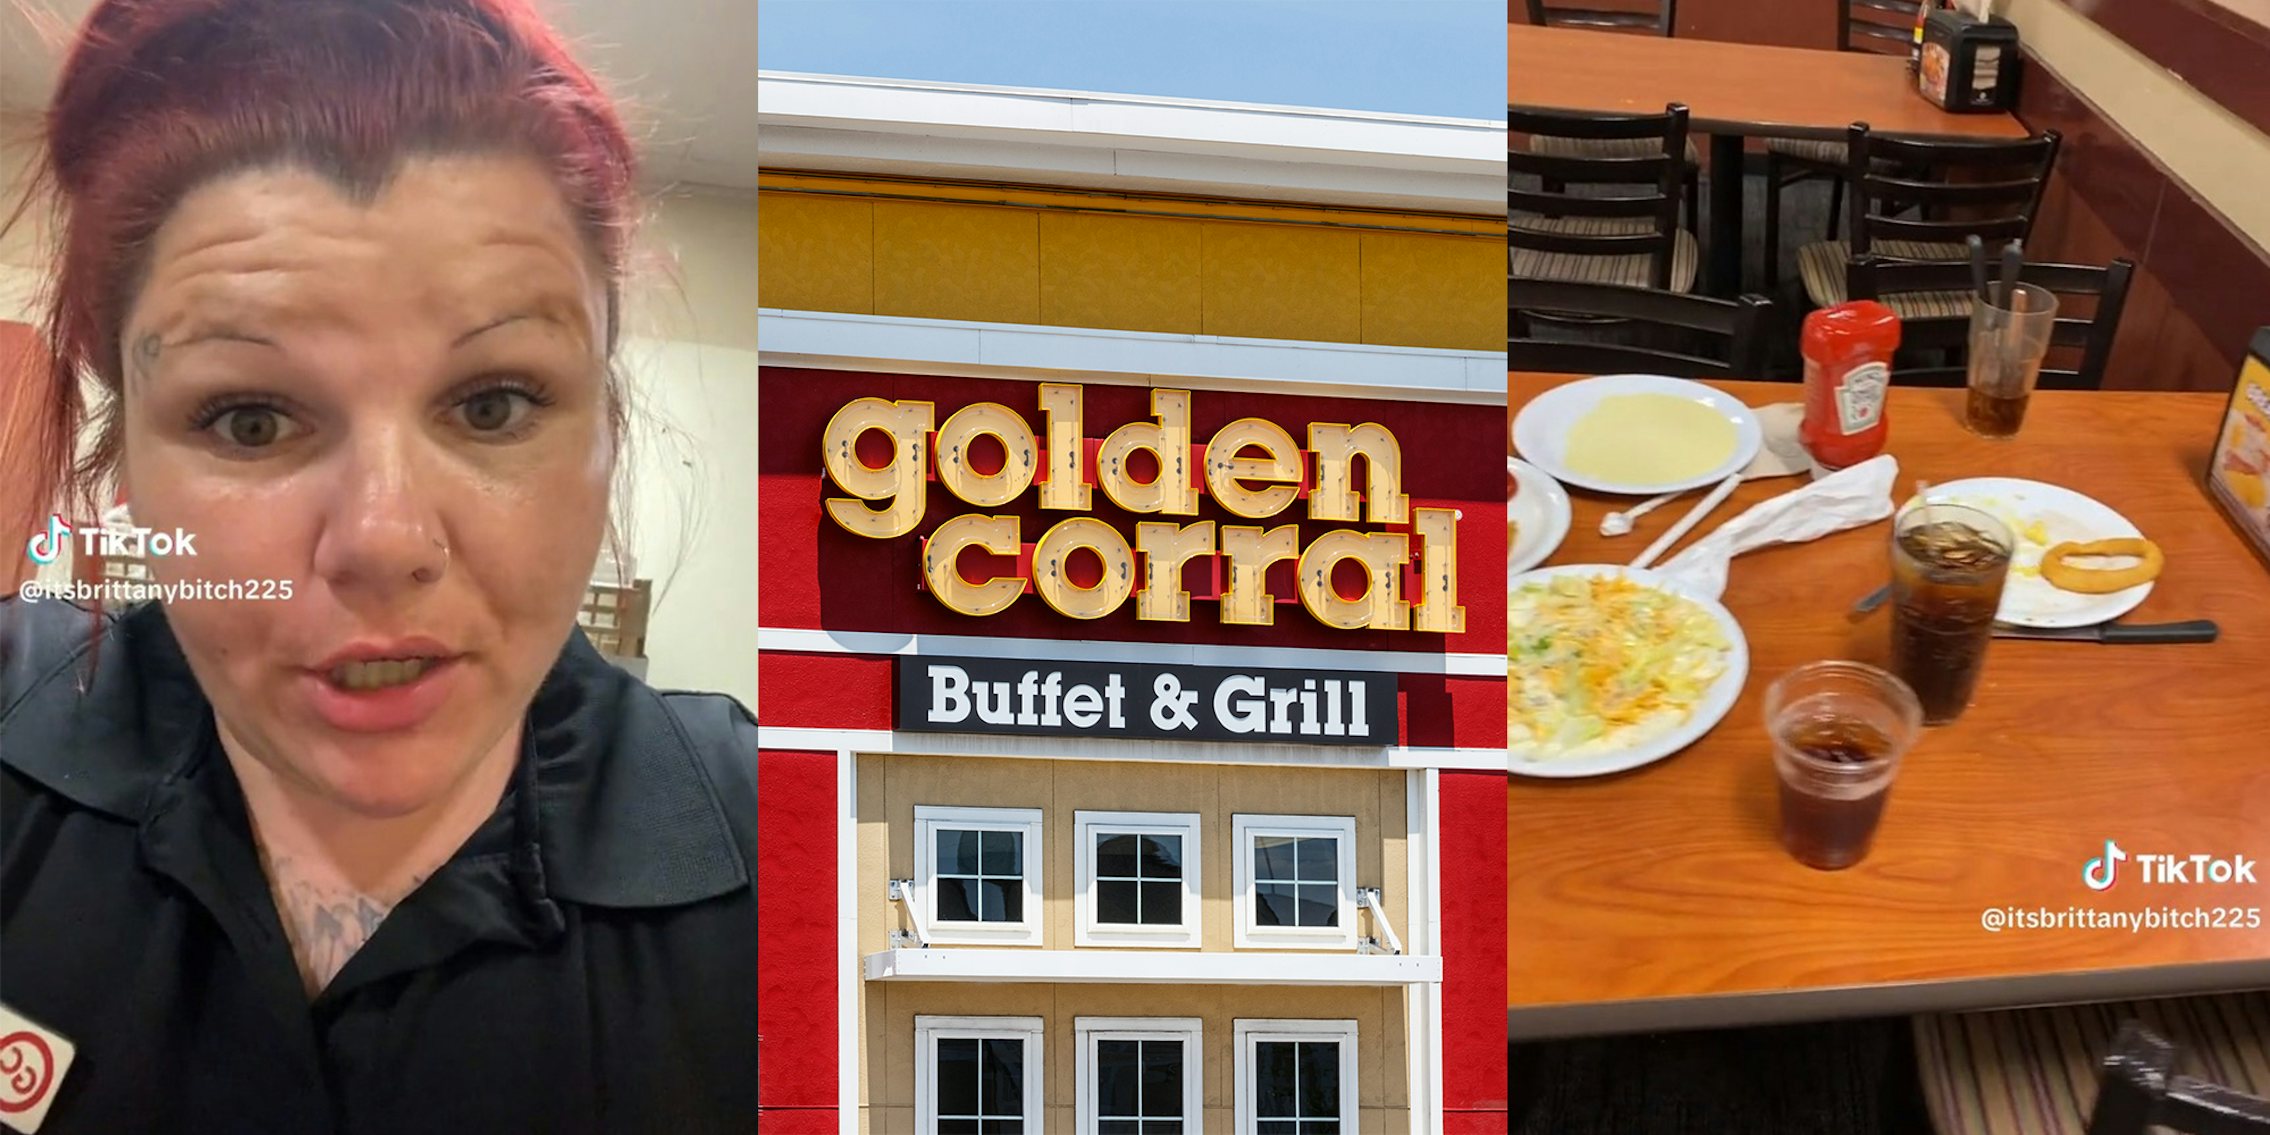 Golden Corral Server Says She Made $69 from 50 Tables